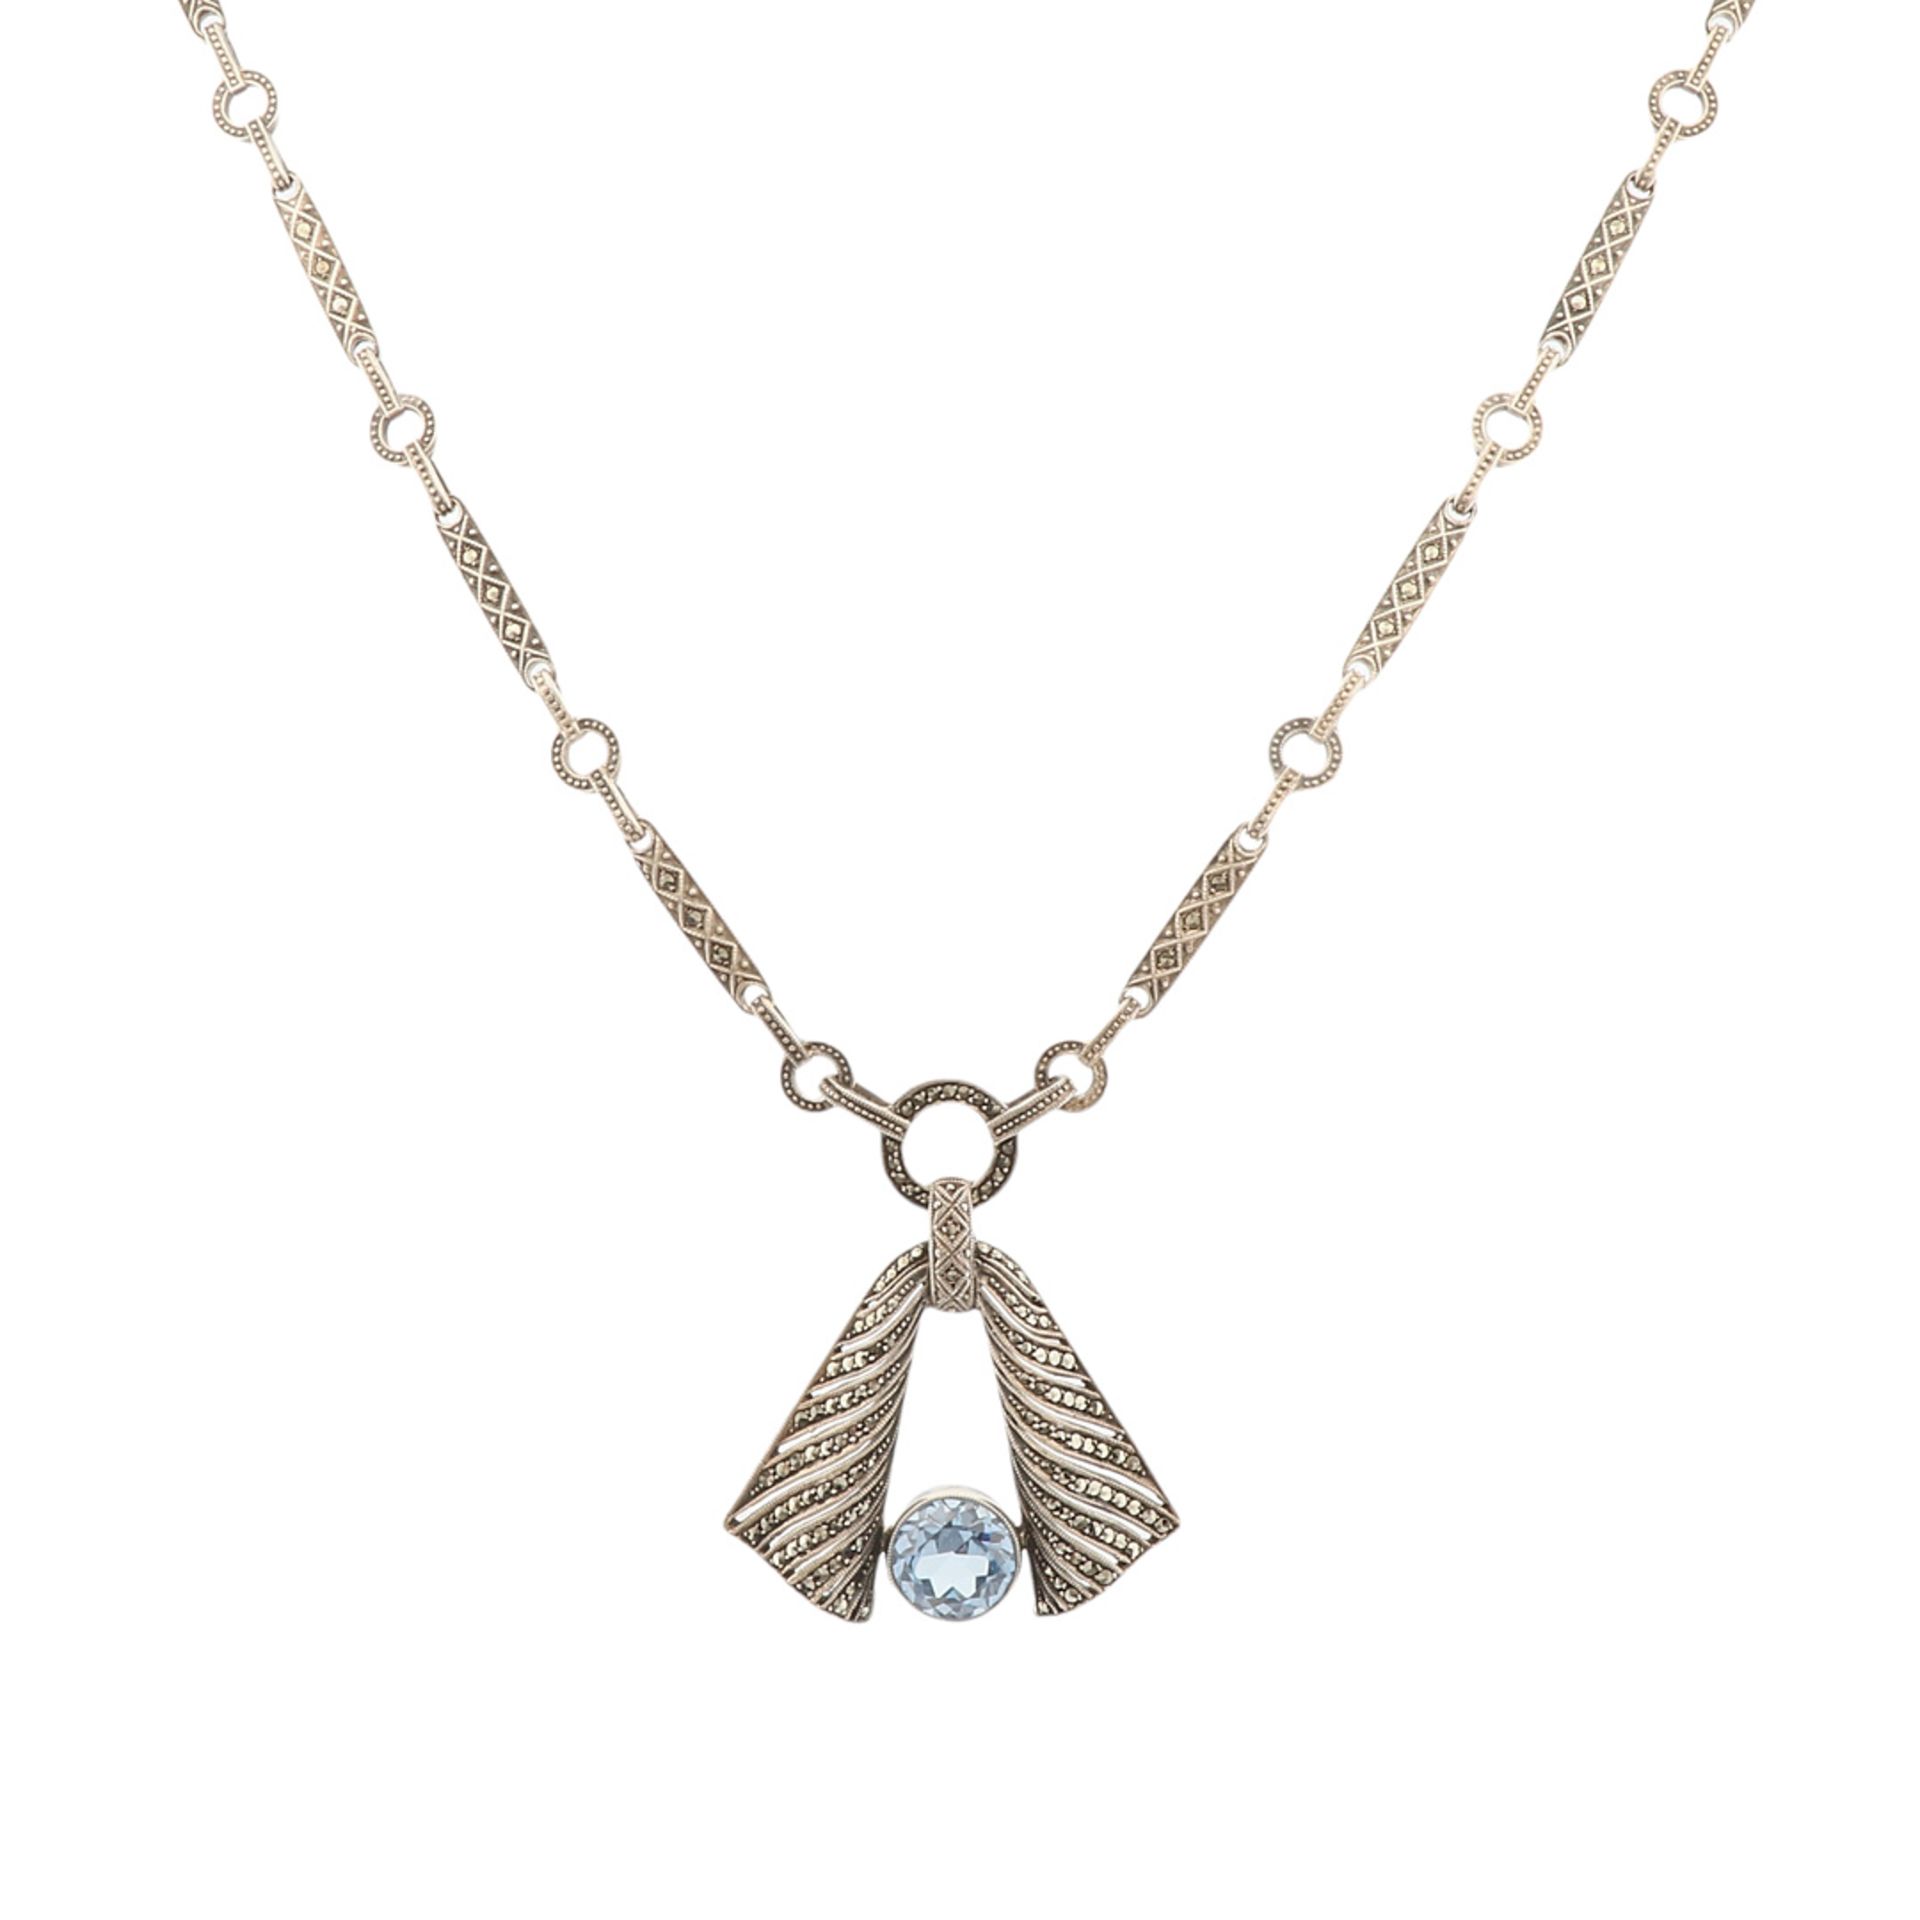 Theodor Fahrner Art Deco necklace with blue spinel and marcasites - Image 2 of 4